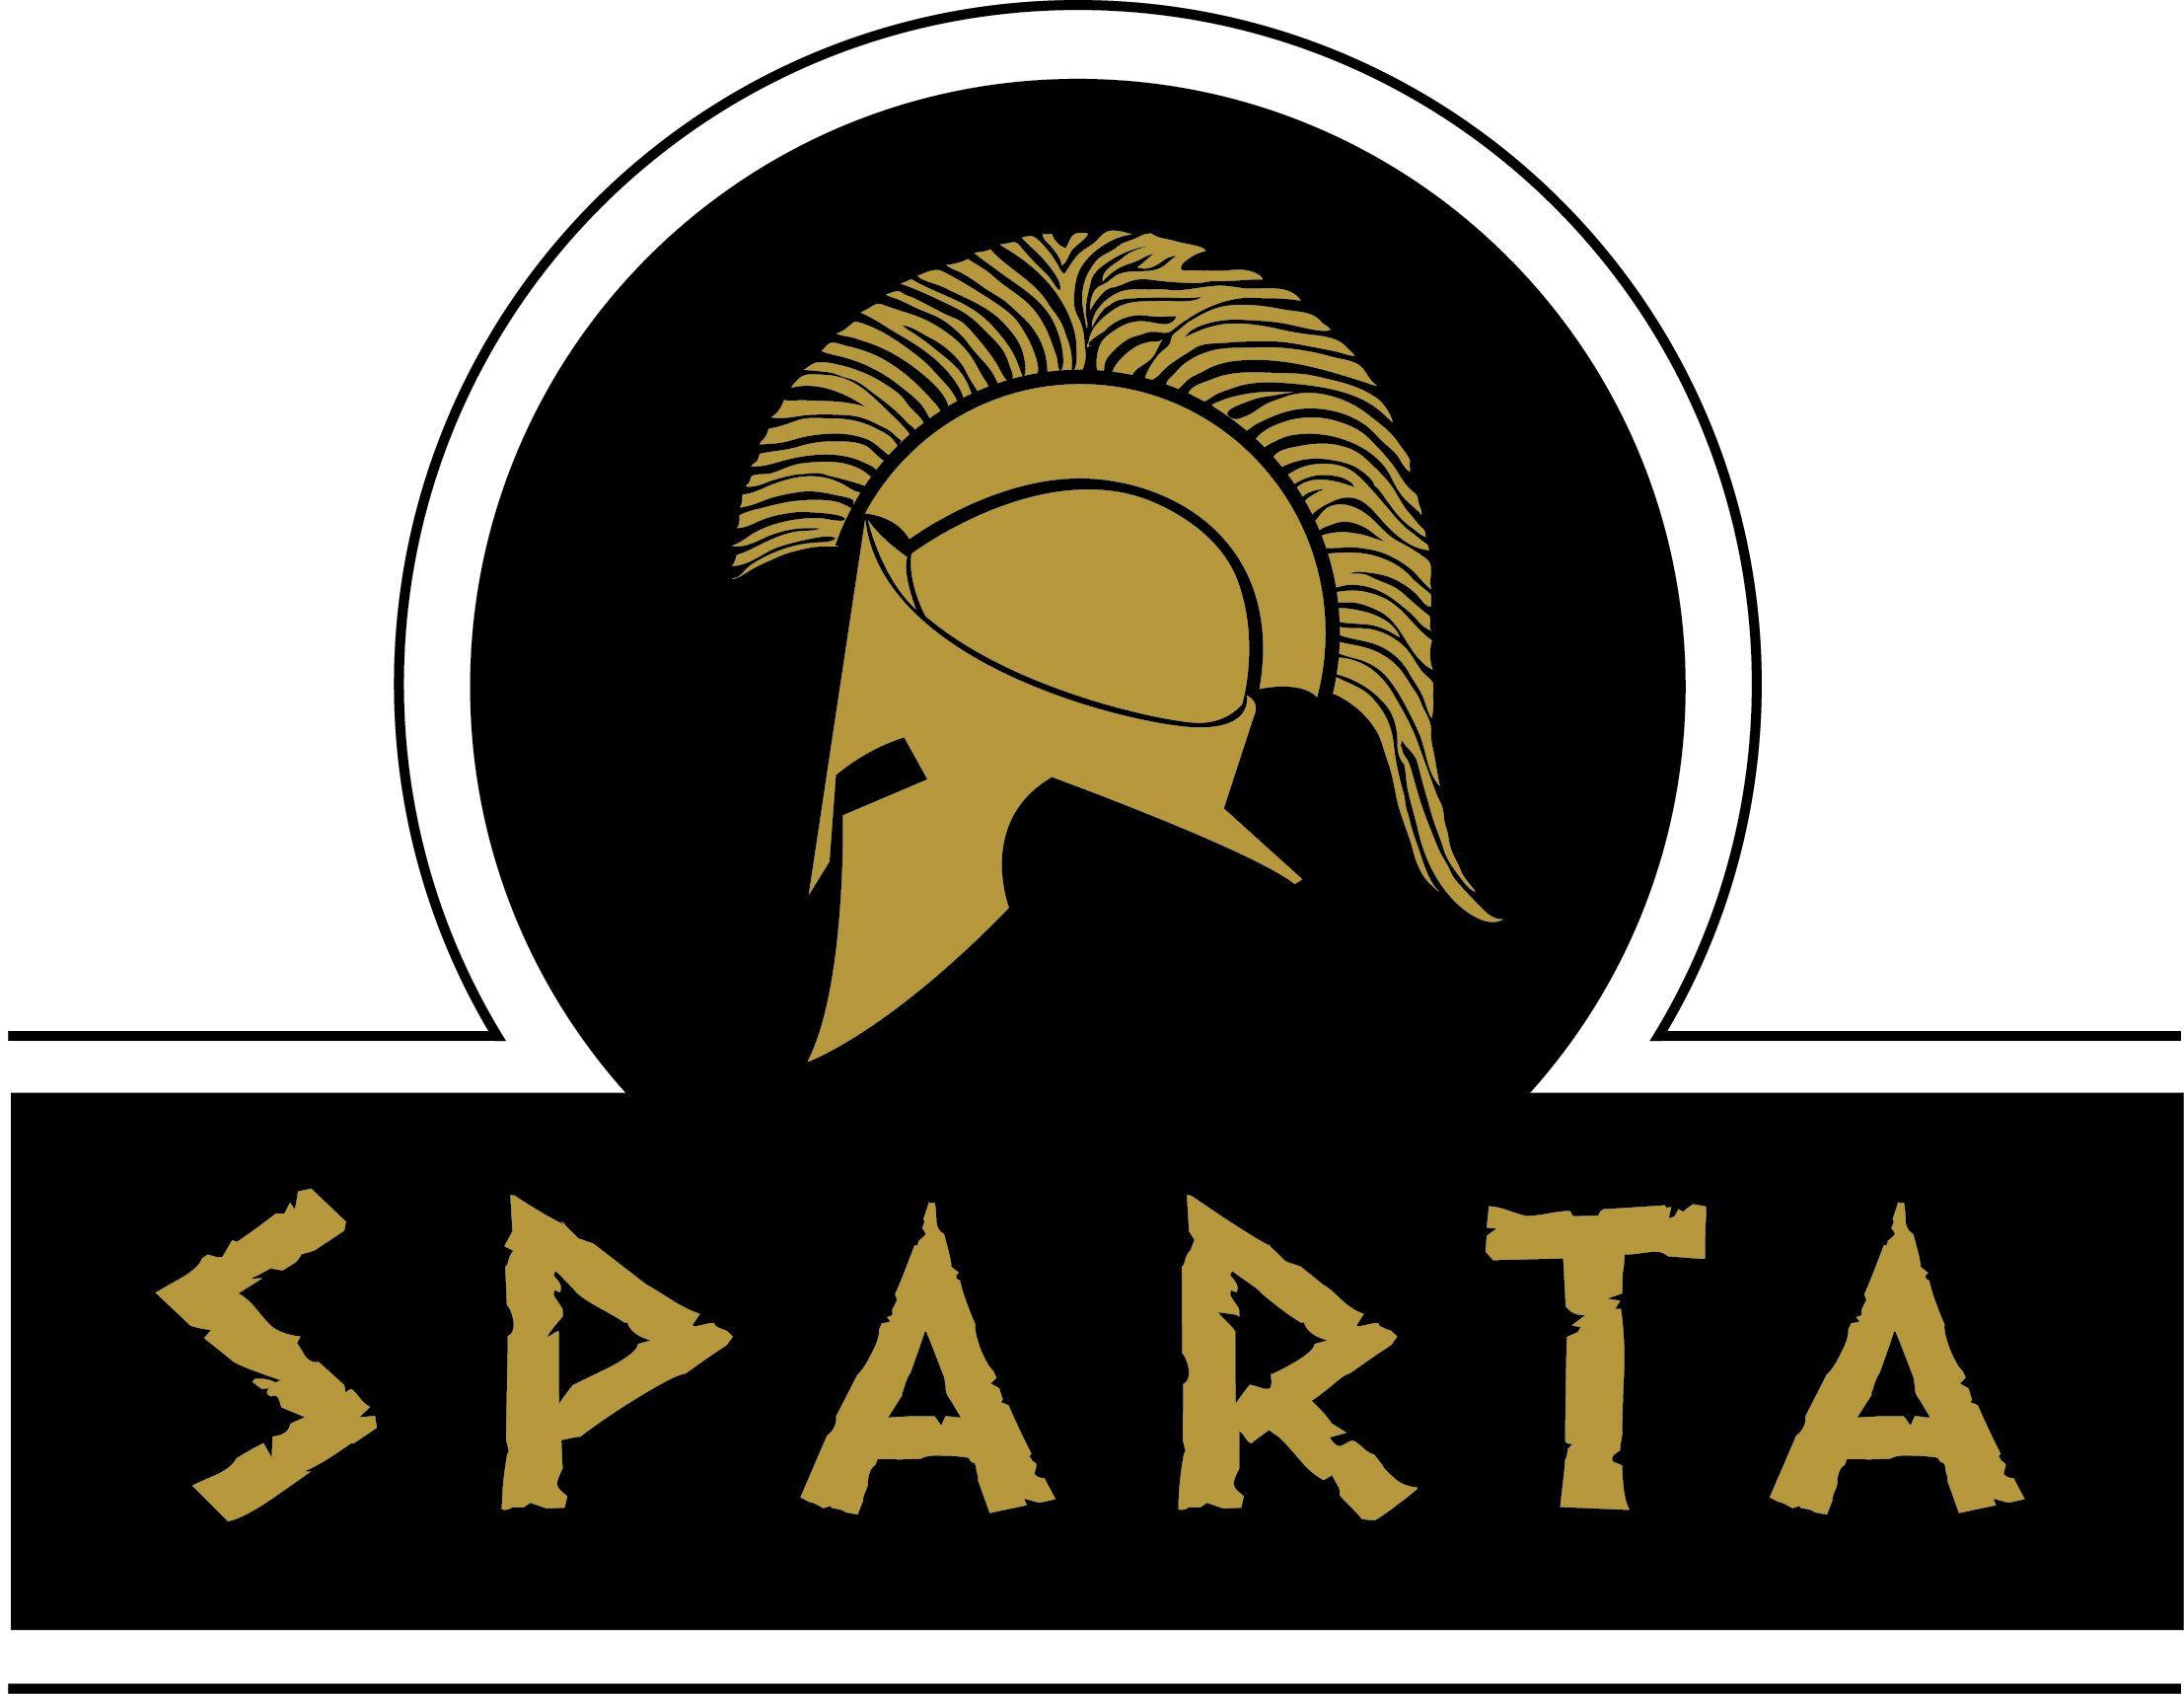 Ancient Spartan Logo - List of Synonyms and Antonyms of the Word: sparta logo